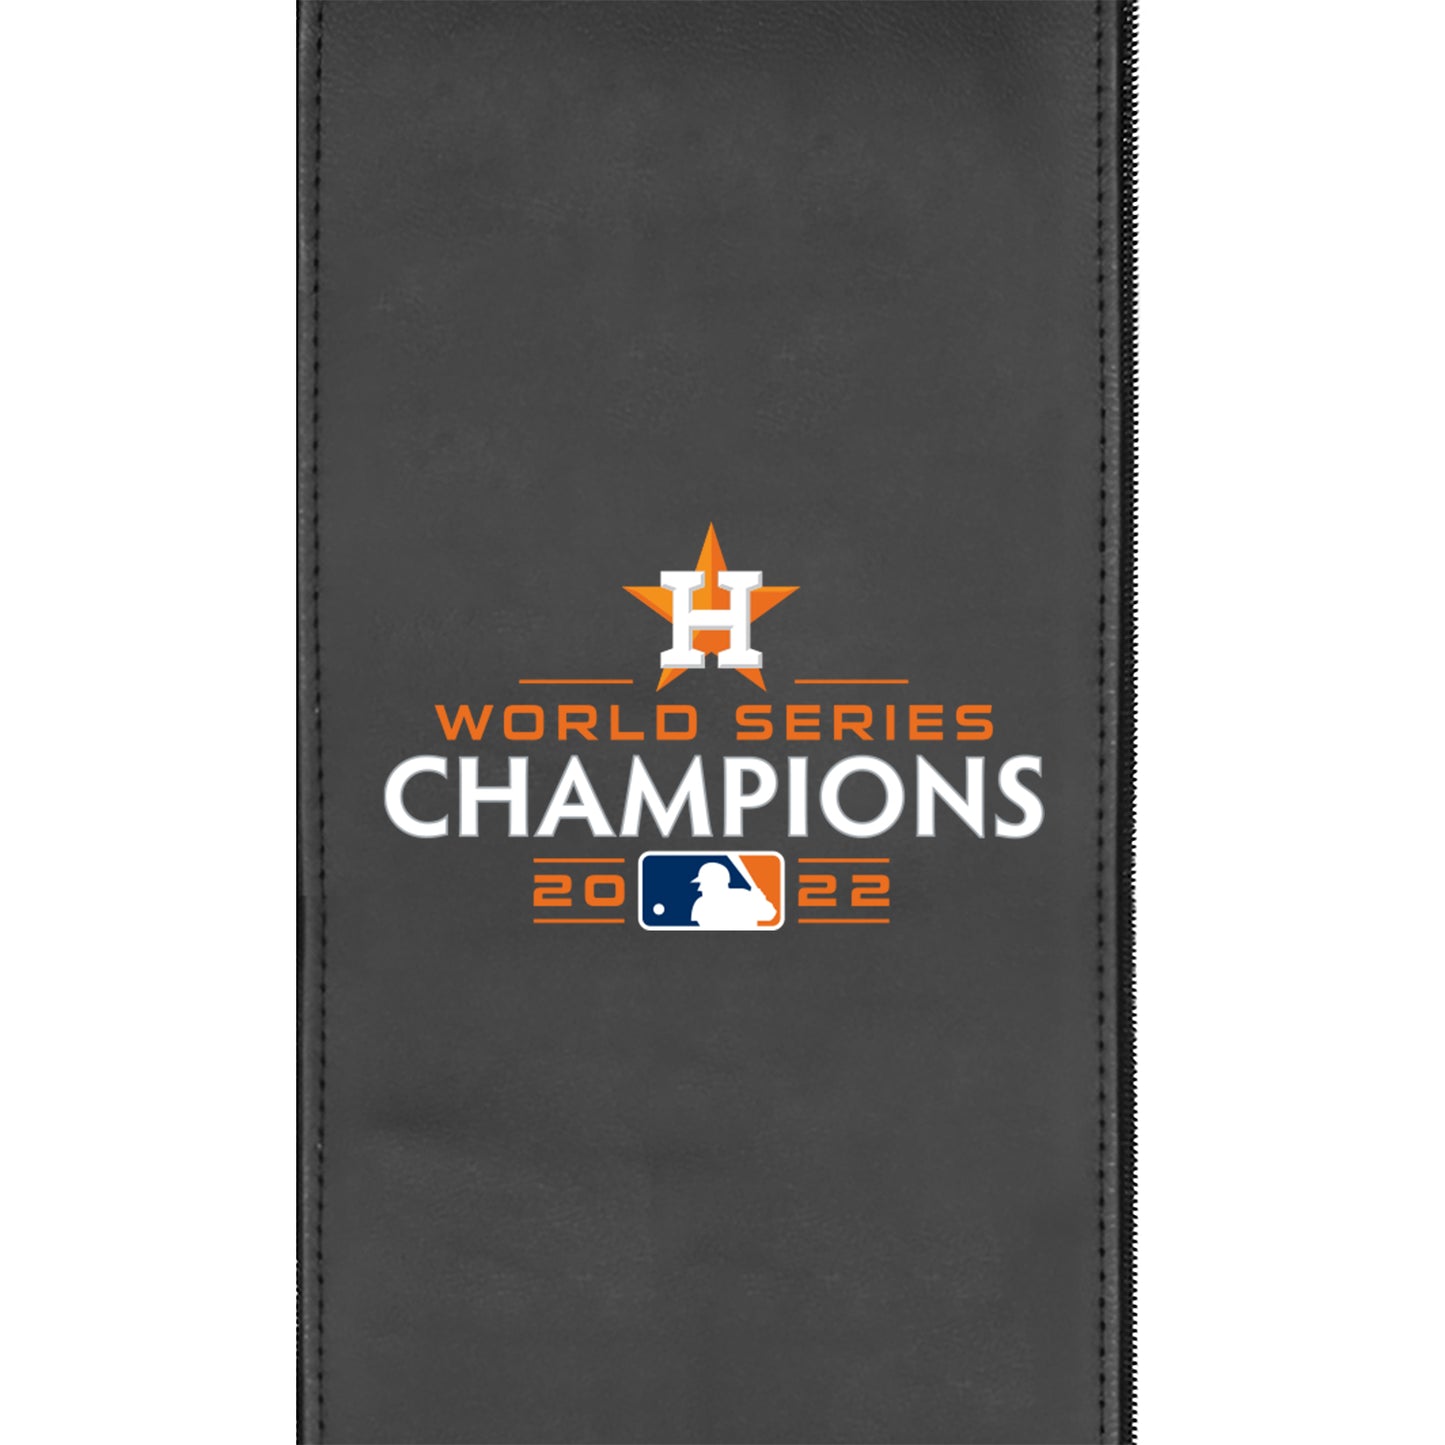 Relax Home Theater Recliner with Houston Astros 2022 Champions